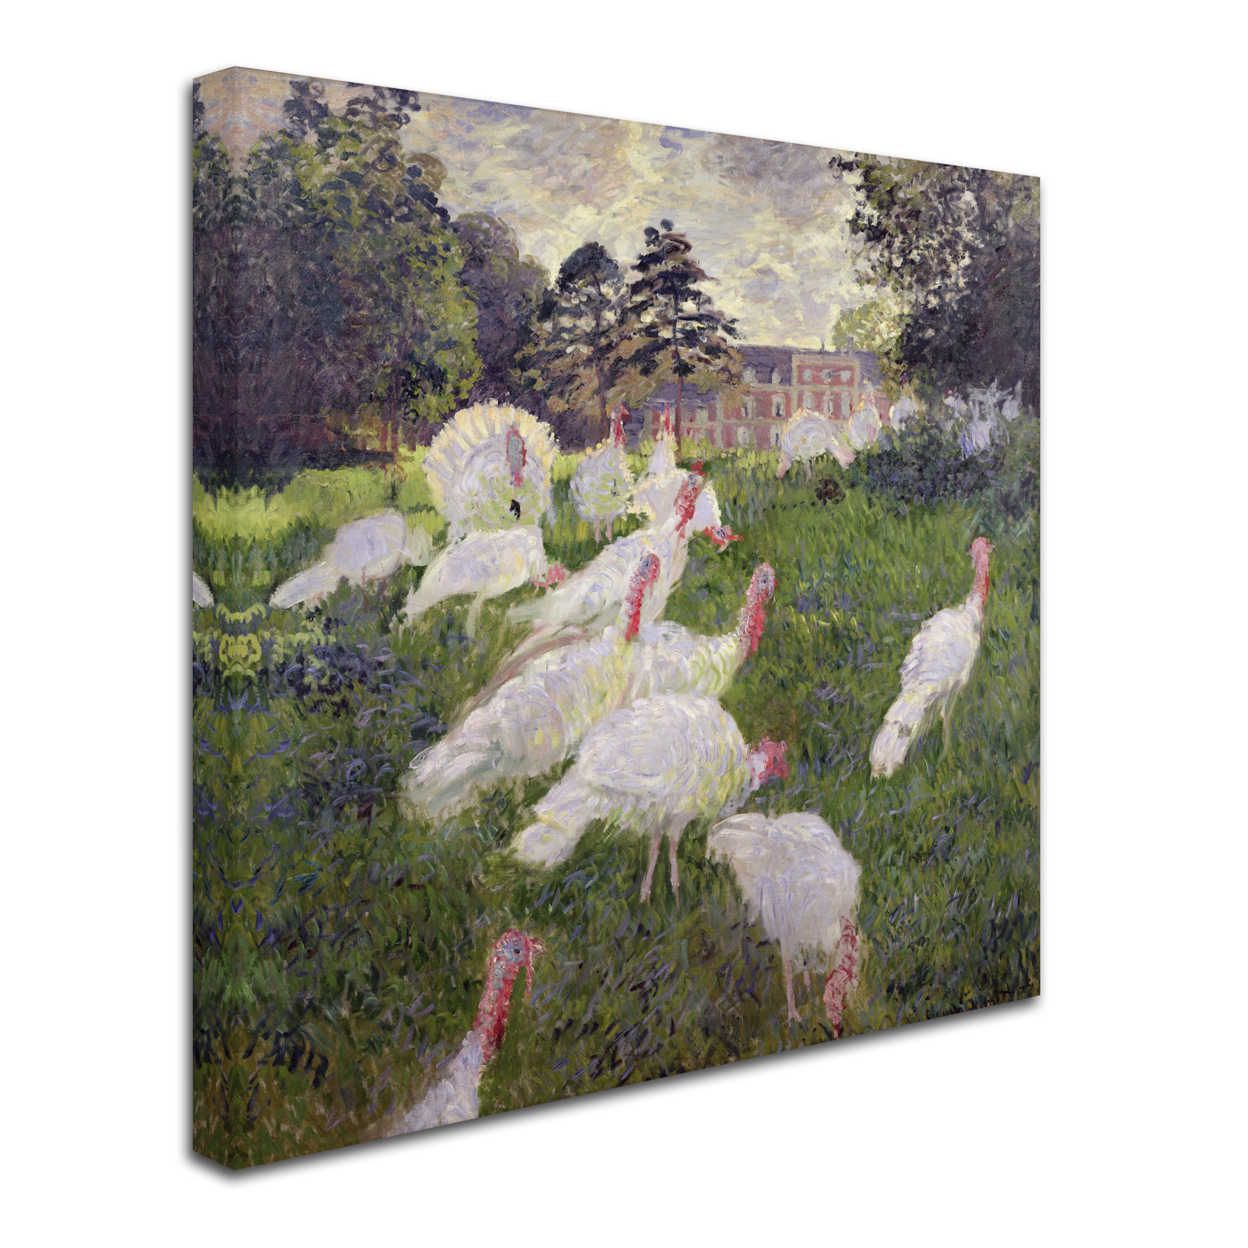 Monet 'The Turkeys At The Chateau' Huge Canvas Art 35 X 35